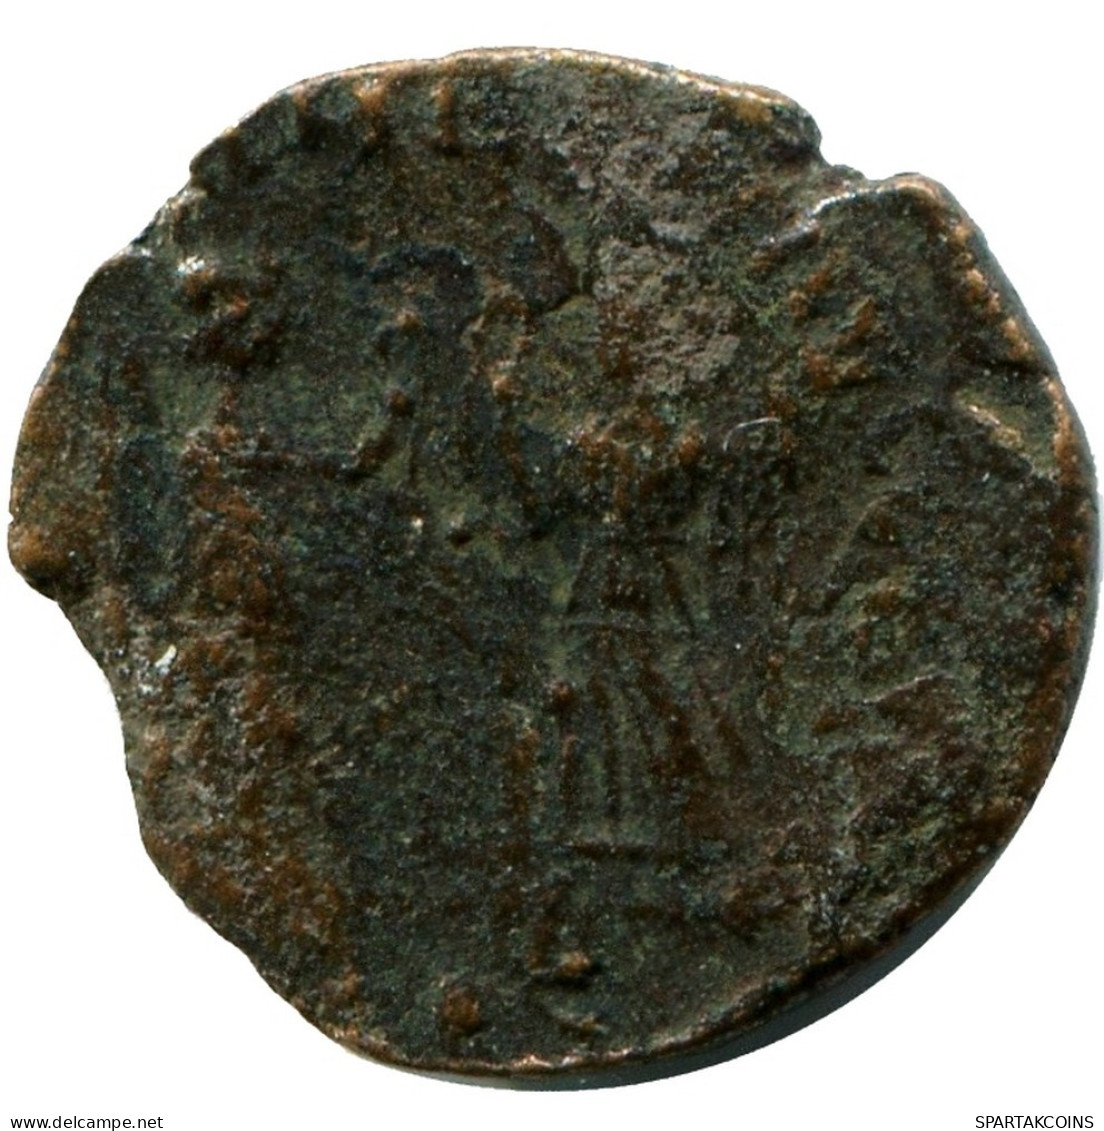 CONSTANS MINTED IN ROME ITALY FROM THE ROYAL ONTARIO MUSEUM #ANC11498.14.E.A - El Imperio Christiano (307 / 363)